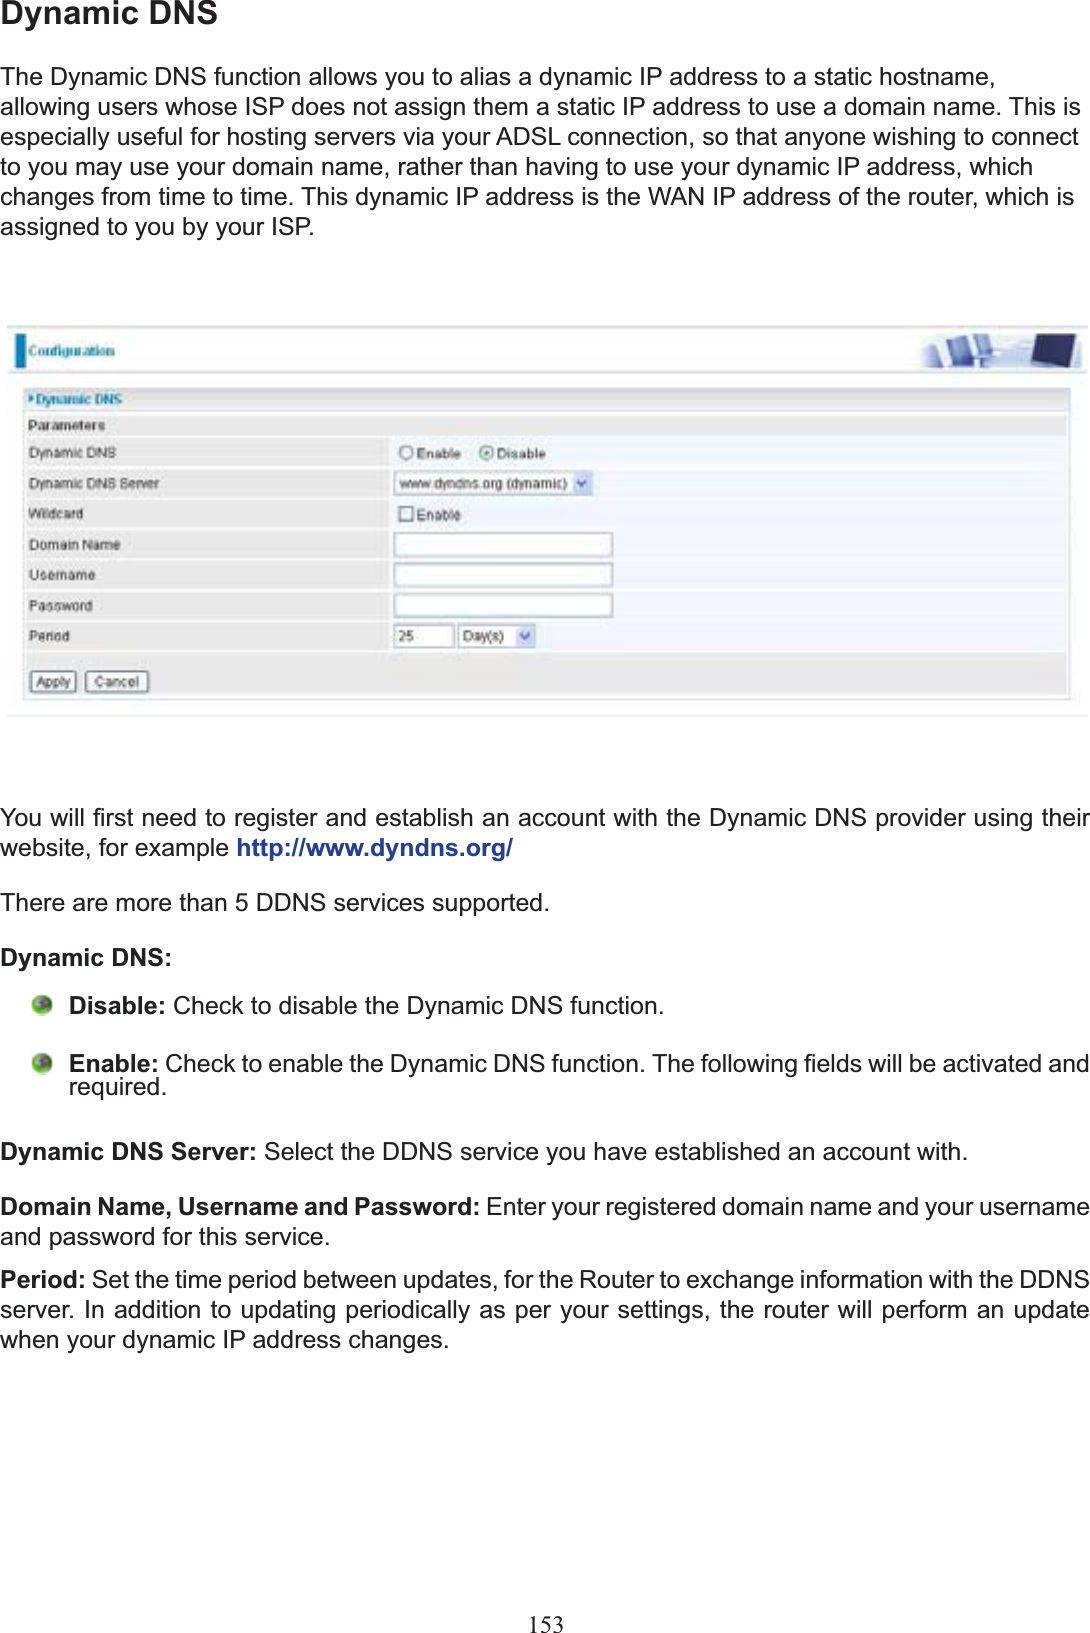 153Dynamic DNSThe Dynamic DNS function allows you to alias a dynamic IP address to a static hostname, allowing users whose ISP does not assign them a static IP address to use a domain name. This is especially useful for hosting servers via your ADSL connection, so that anyone wishing to connect to you may use your domain name, rather than having to use your dynamic IP address, which FKDQJHVIURPWLPHWRWLPH7KLVG\QDPLF,3DGGUHVVLVWKH:$1,3DGGUHVVRIWKHURXWHUZKLFKLVassigned to you by your ISP.&lt;RXZLOO¿UVWQHHGWRUHJLVWHUDQGHVWDEOLVKDQDFFRXQWZLWKWKH&apos;\QDPLF&apos;16SURYLGHUXVLQJWKHLUwebsite, for example http://www.dyndns.org/There are more than 5 DDNS services supported.Dynamic DNS:Disable: Check to disable the Dynamic DNS function.Enable: &amp;KHFNWRHQDEOHWKH&apos;\QDPLF&apos;16IXQFWLRQ7KHIROORZLQJ¿HOGVZLOOEHDFWLYDWHGDQGUHTXLUHGDynamic DNS Server: Select the DDNS service you have established an account with.Domain Name, Username and Password: Enter your registered domain name and your username and password for this service.Period: Set the time period between updates, for the Router to exchange information with the DDNS server. In addition to updating periodically as per your settings, the router will perform an update when your dynamic IP address changes.